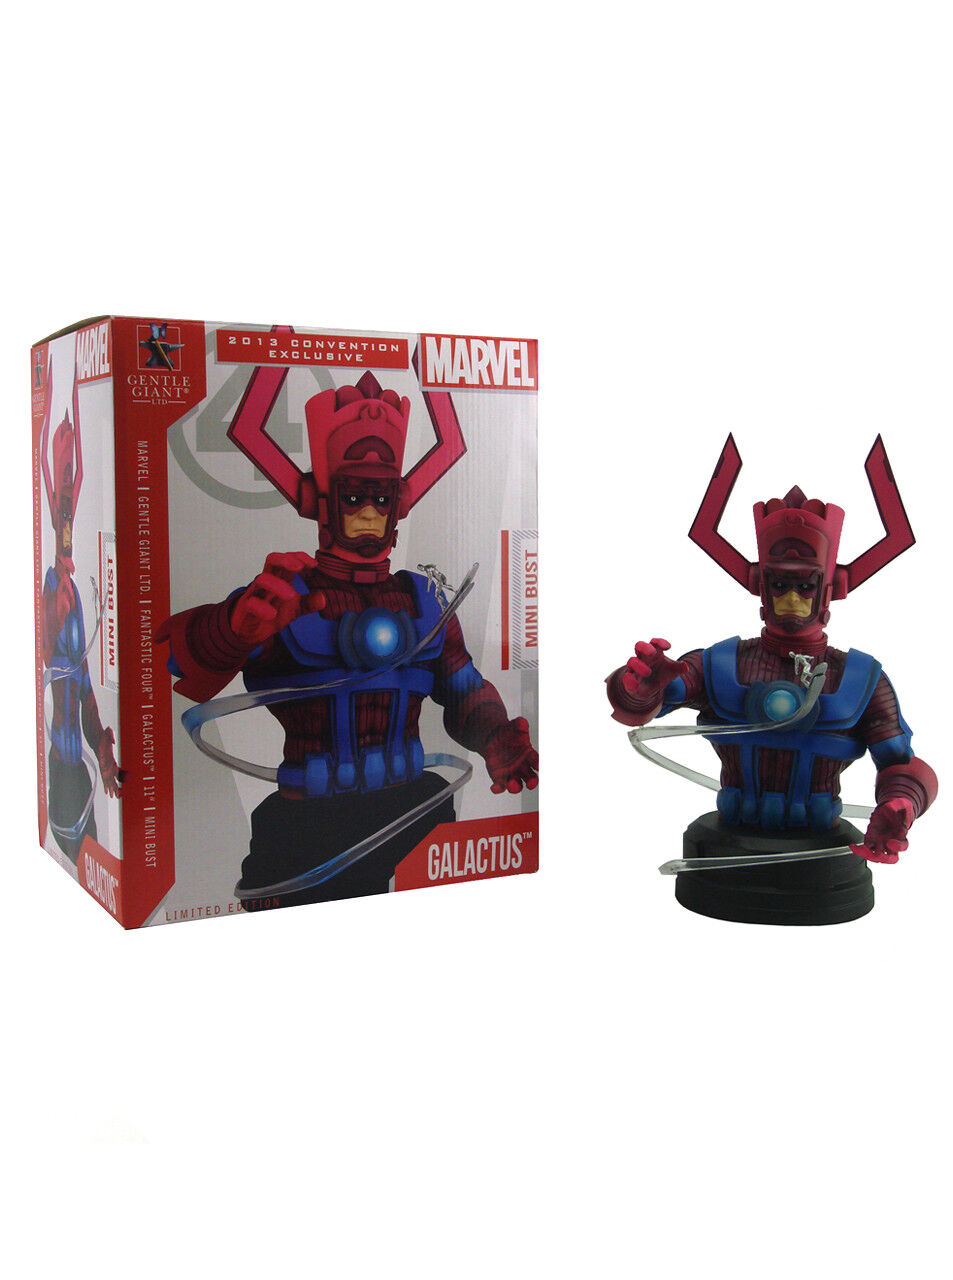 Galactus 2013 SDCC Exclusive Mini Bust Box Gentle Giant Comic Con Limited 42/800